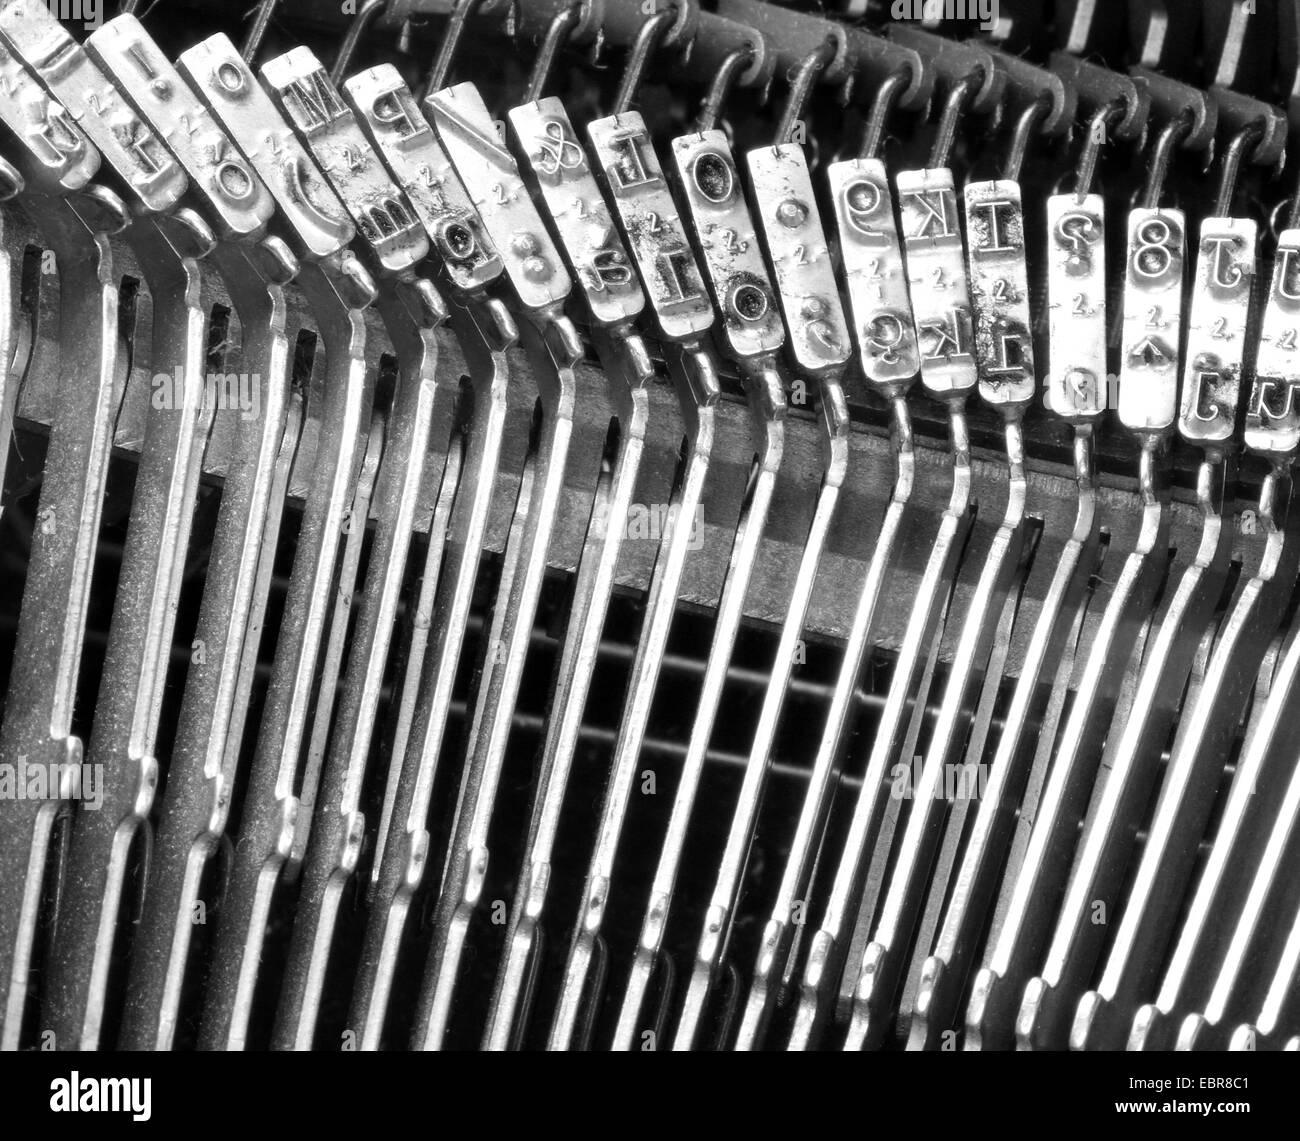 steel hammers for writing with an ancient manual typewriter Stock Photo